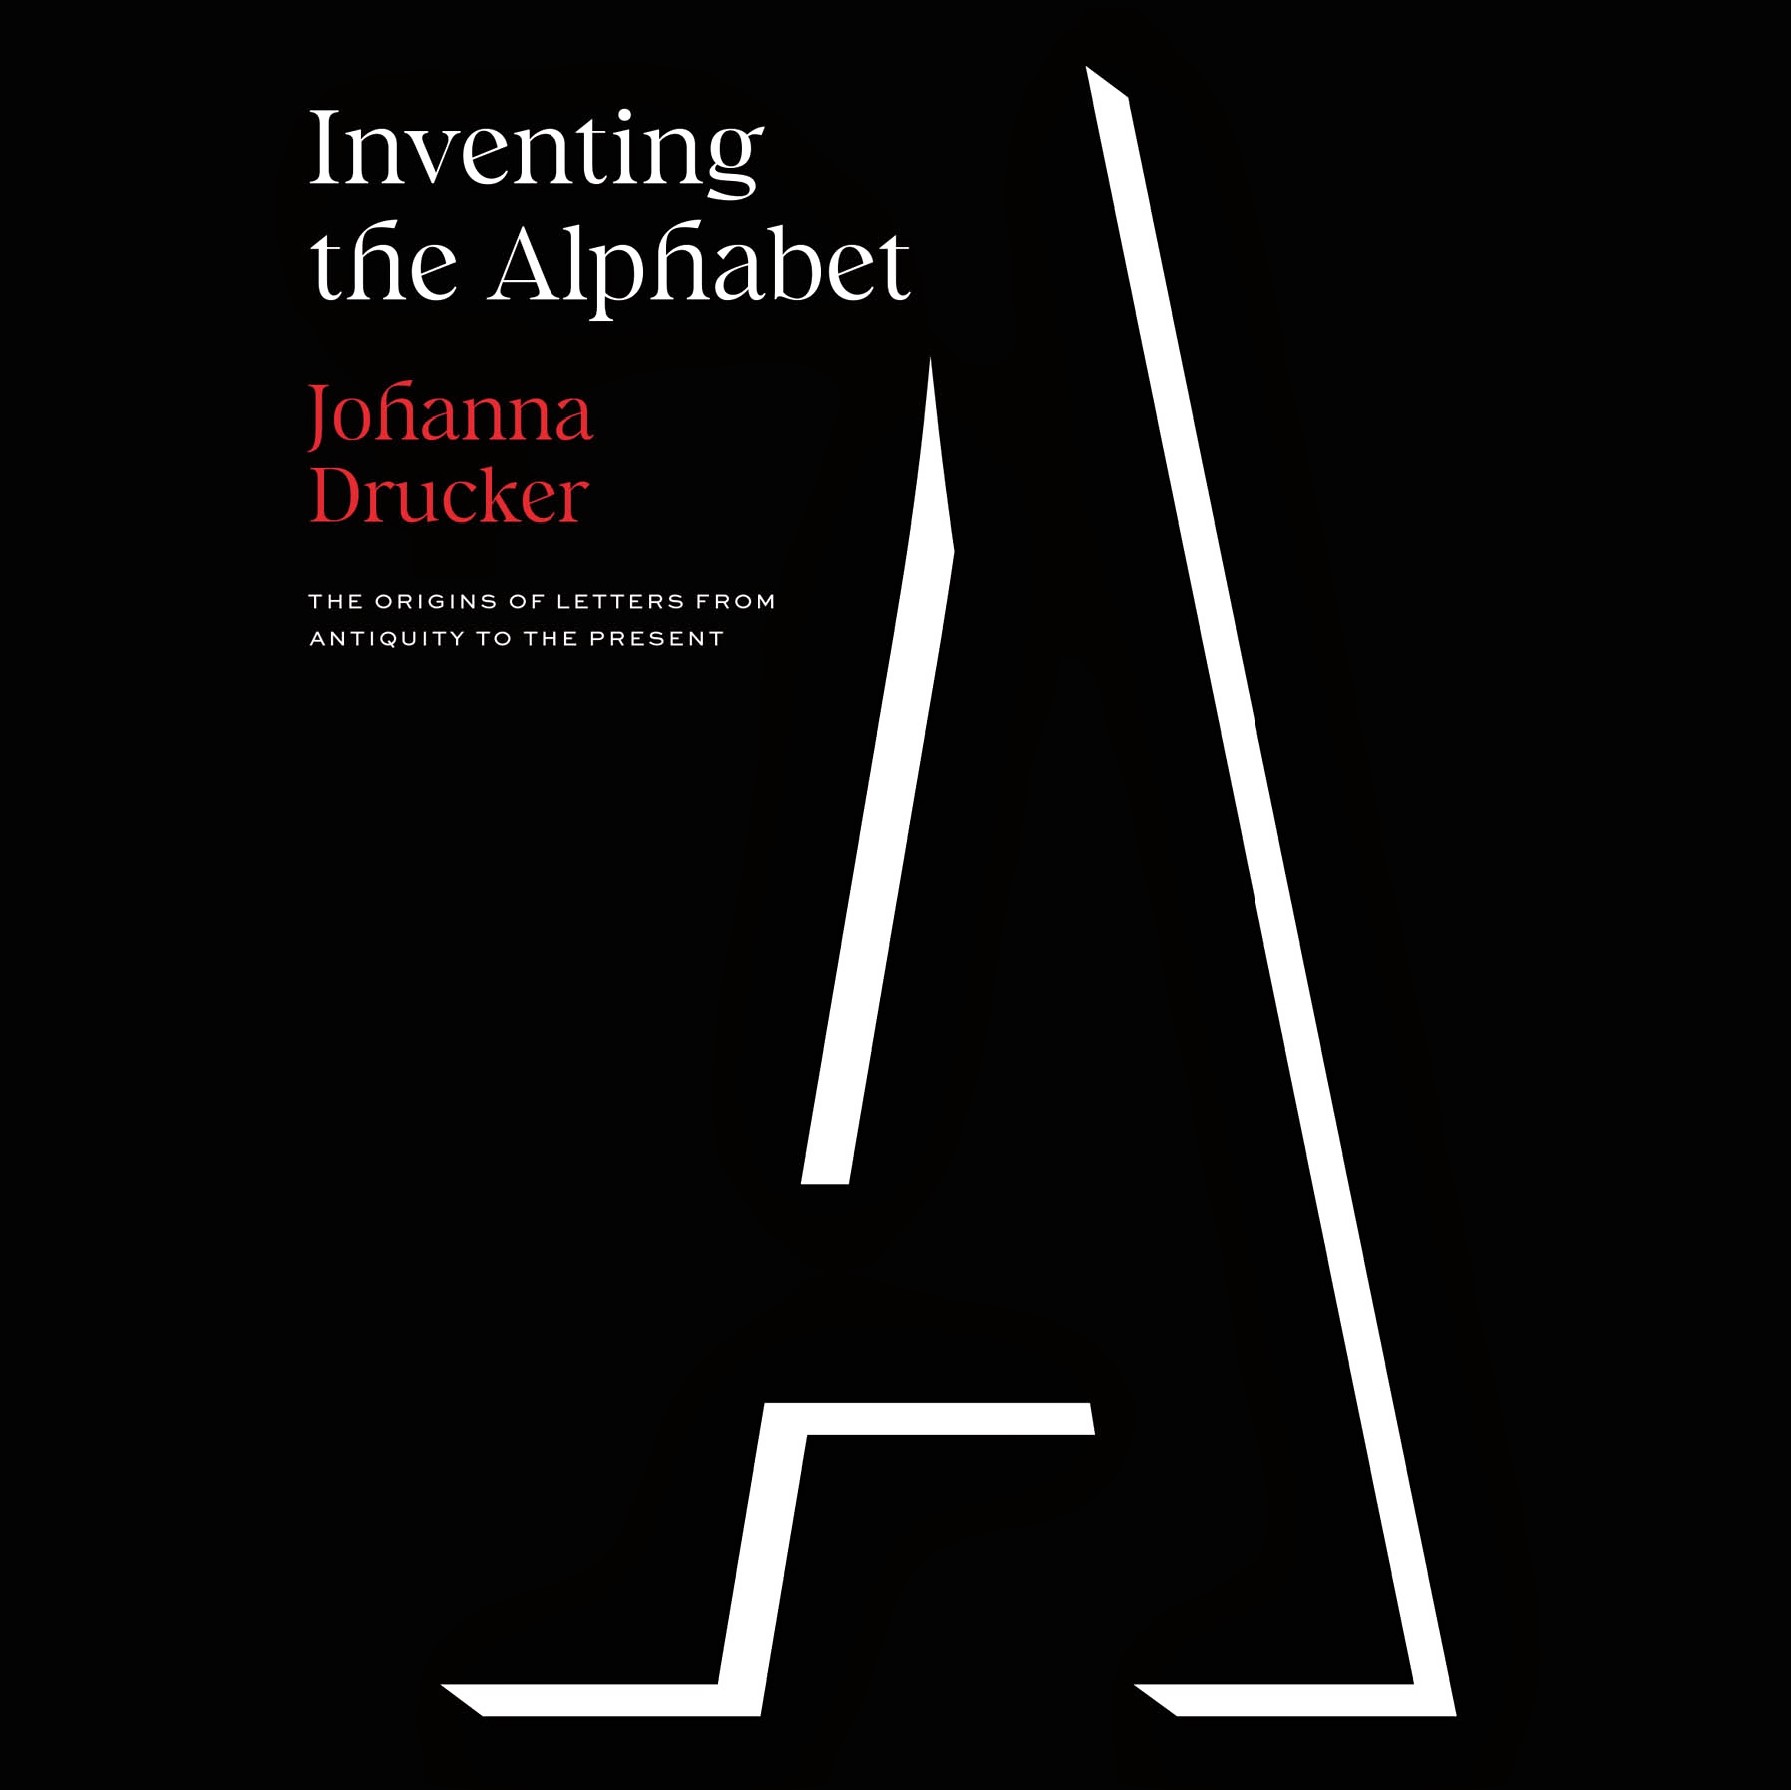 Cover image of Johanna Drucker's Inventing the Alphabet